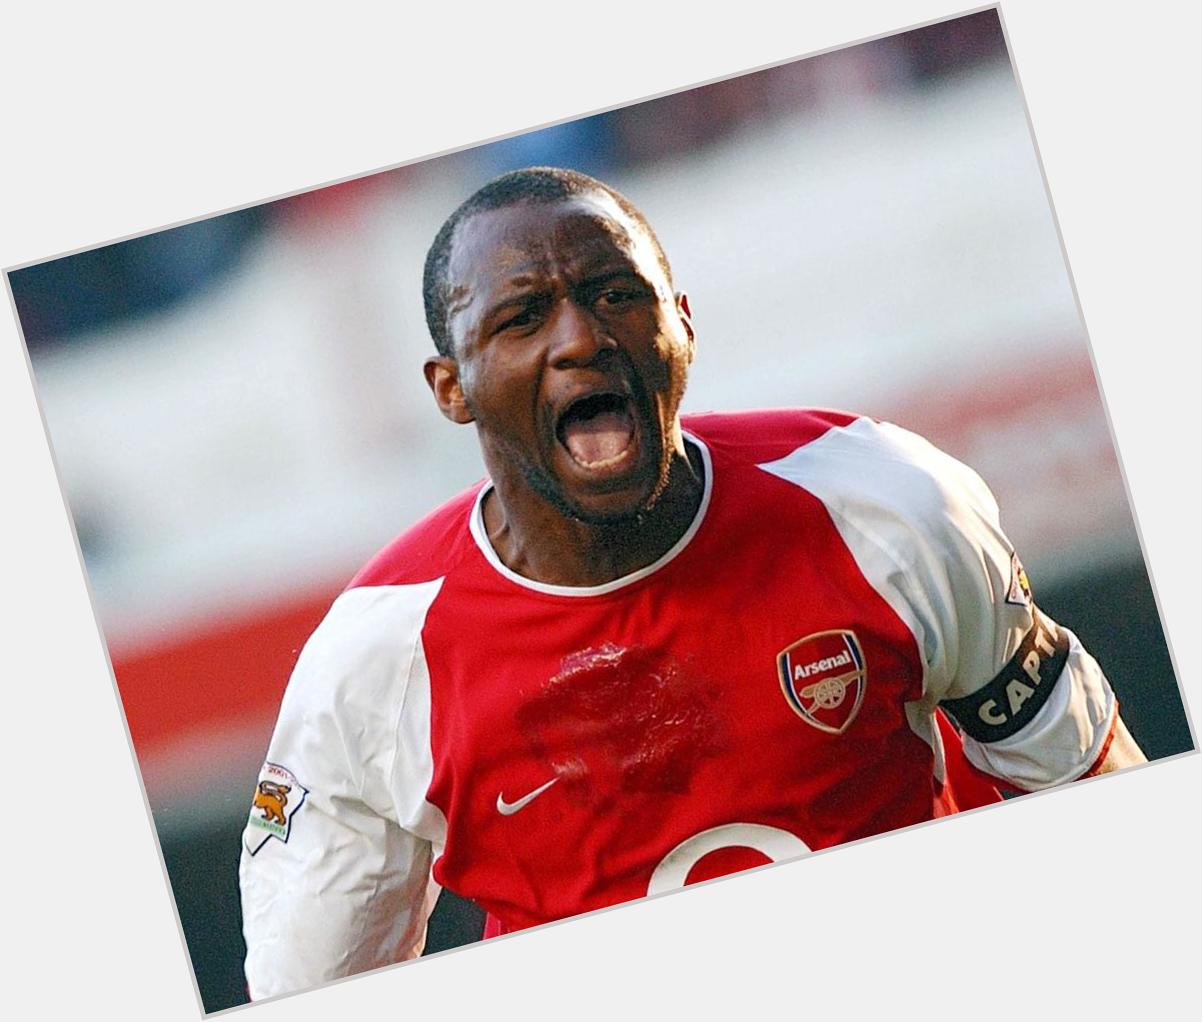 Happy birthday to Patrick Vieira. The Arsenal and France legend turns 39 today. 